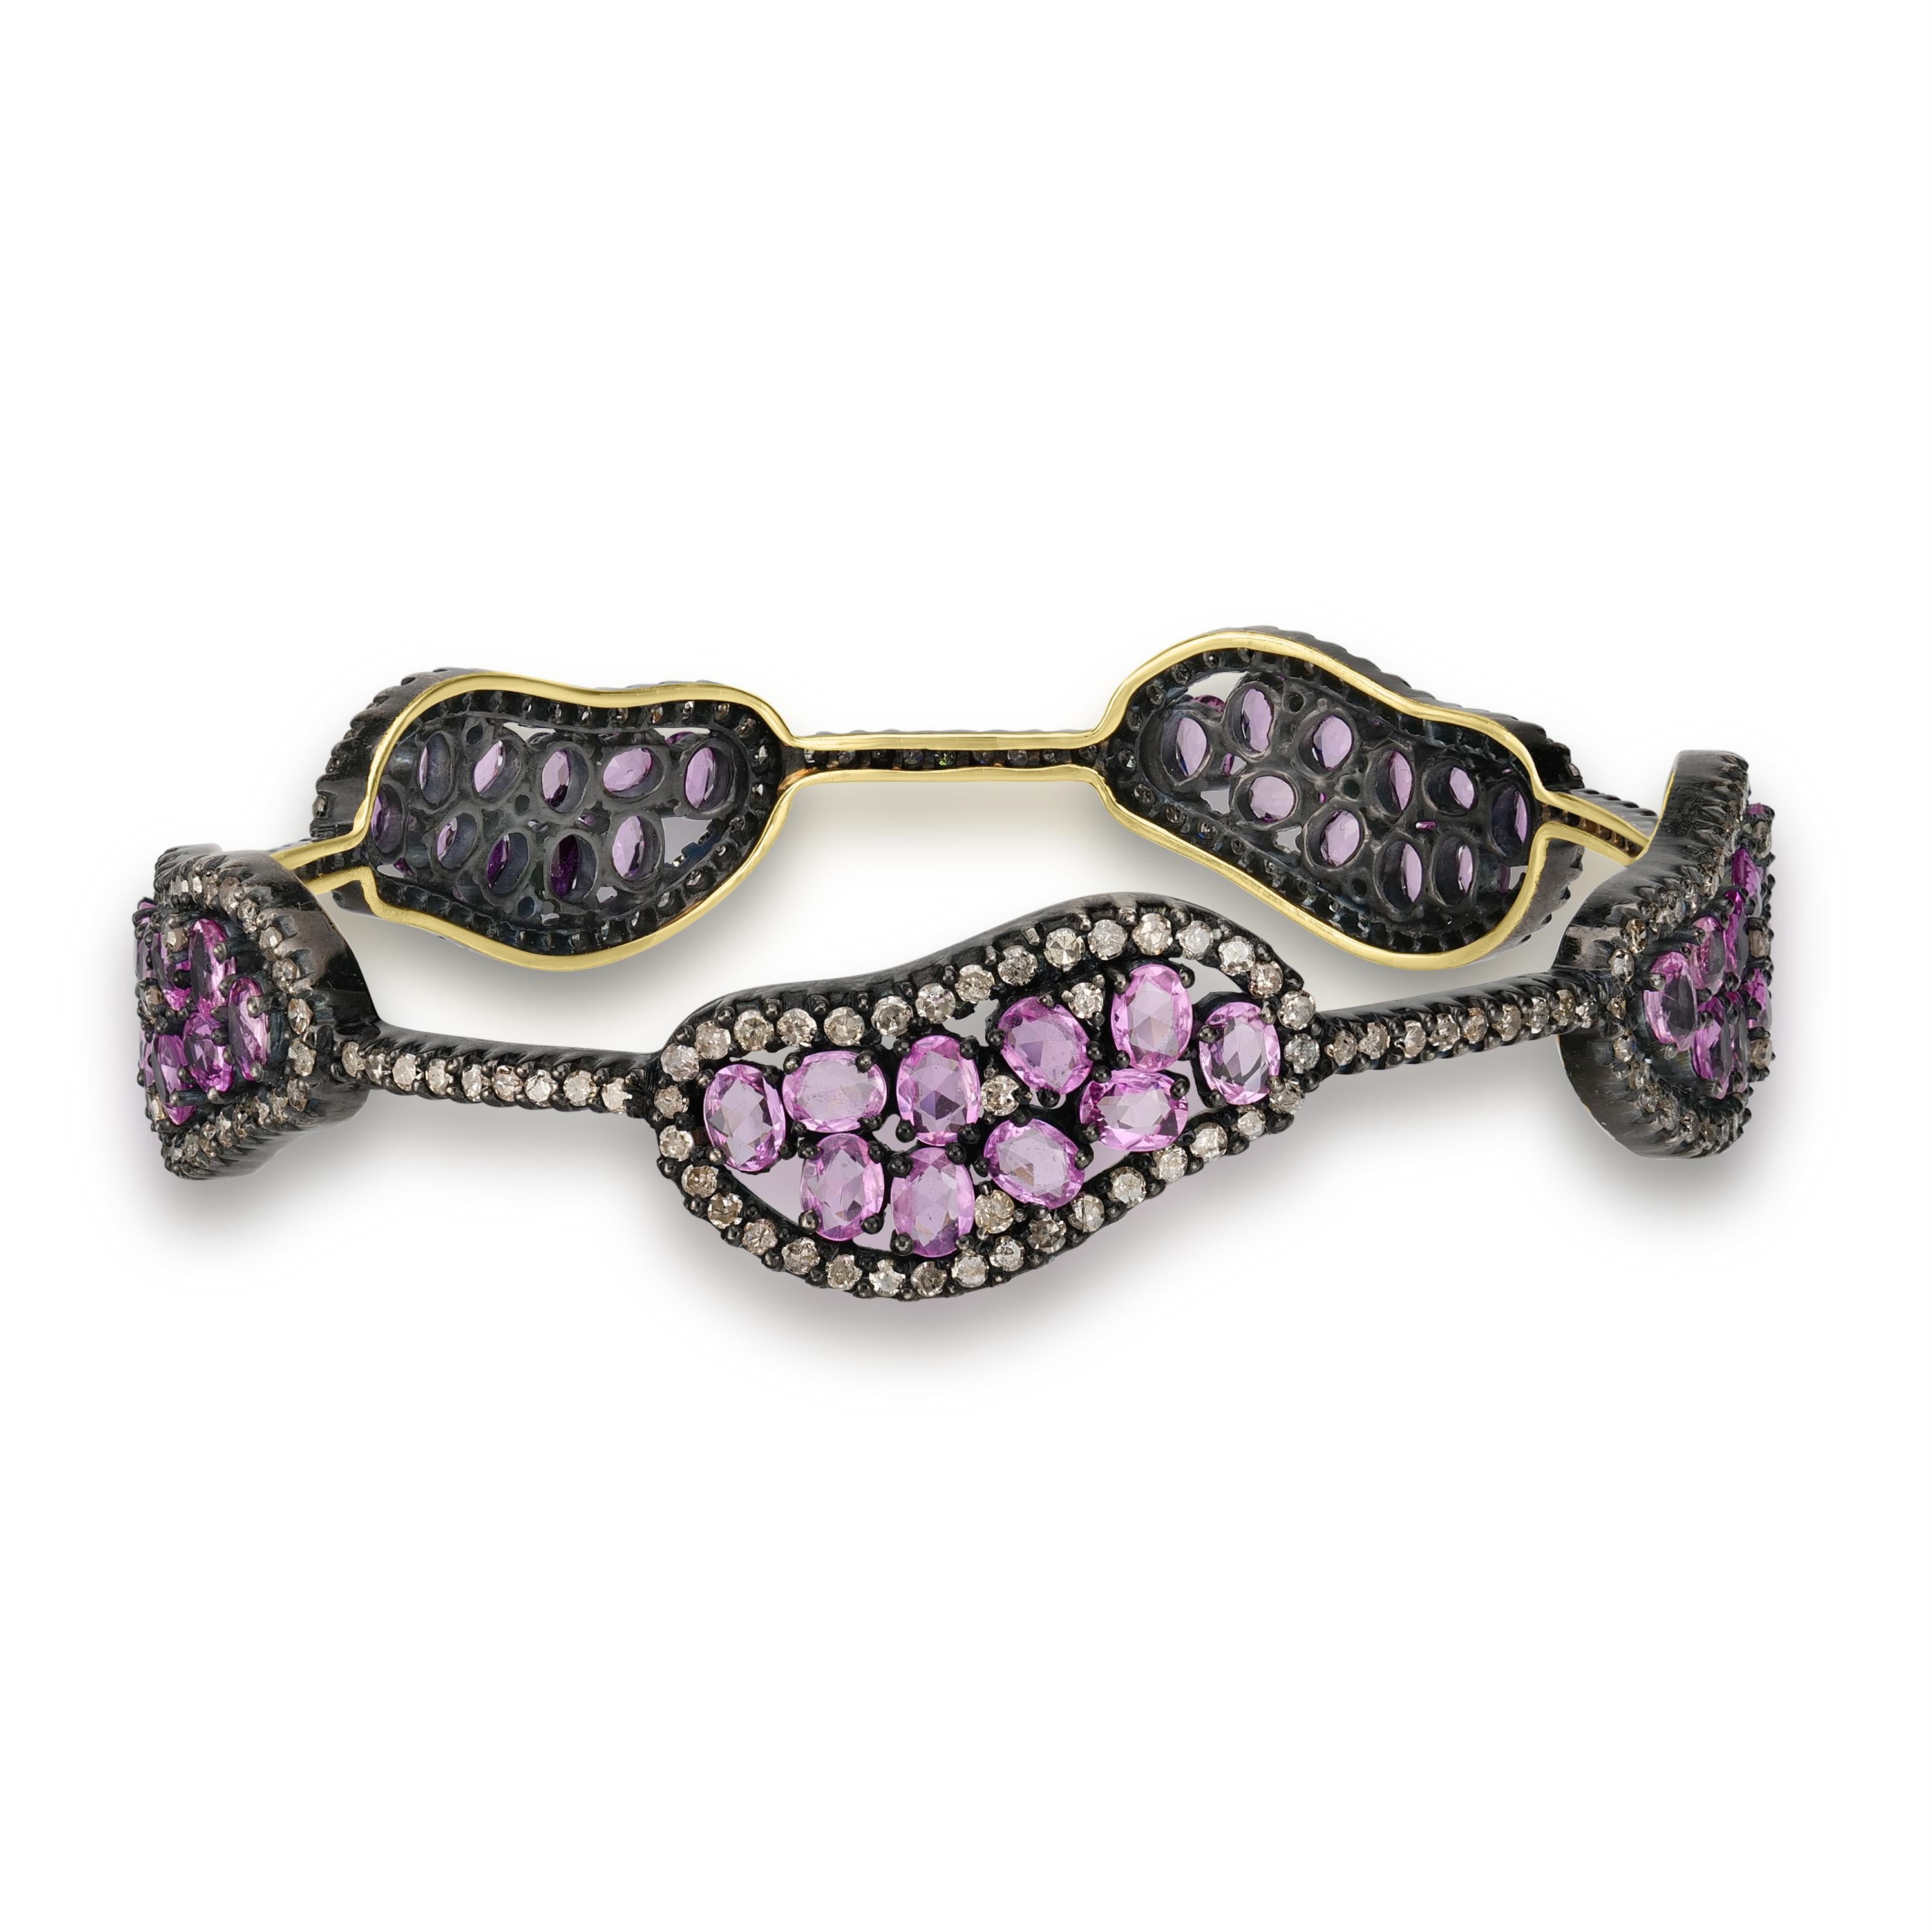 
Presenting the Victorian 13 Cttw. Pink Sapphire and Diamond Station Bangle, a captivating blend of vintage elegance and modern sophistication. This exquisite bangle is meticulously crafted from sterling silver, enhanced with a black rhodium coating